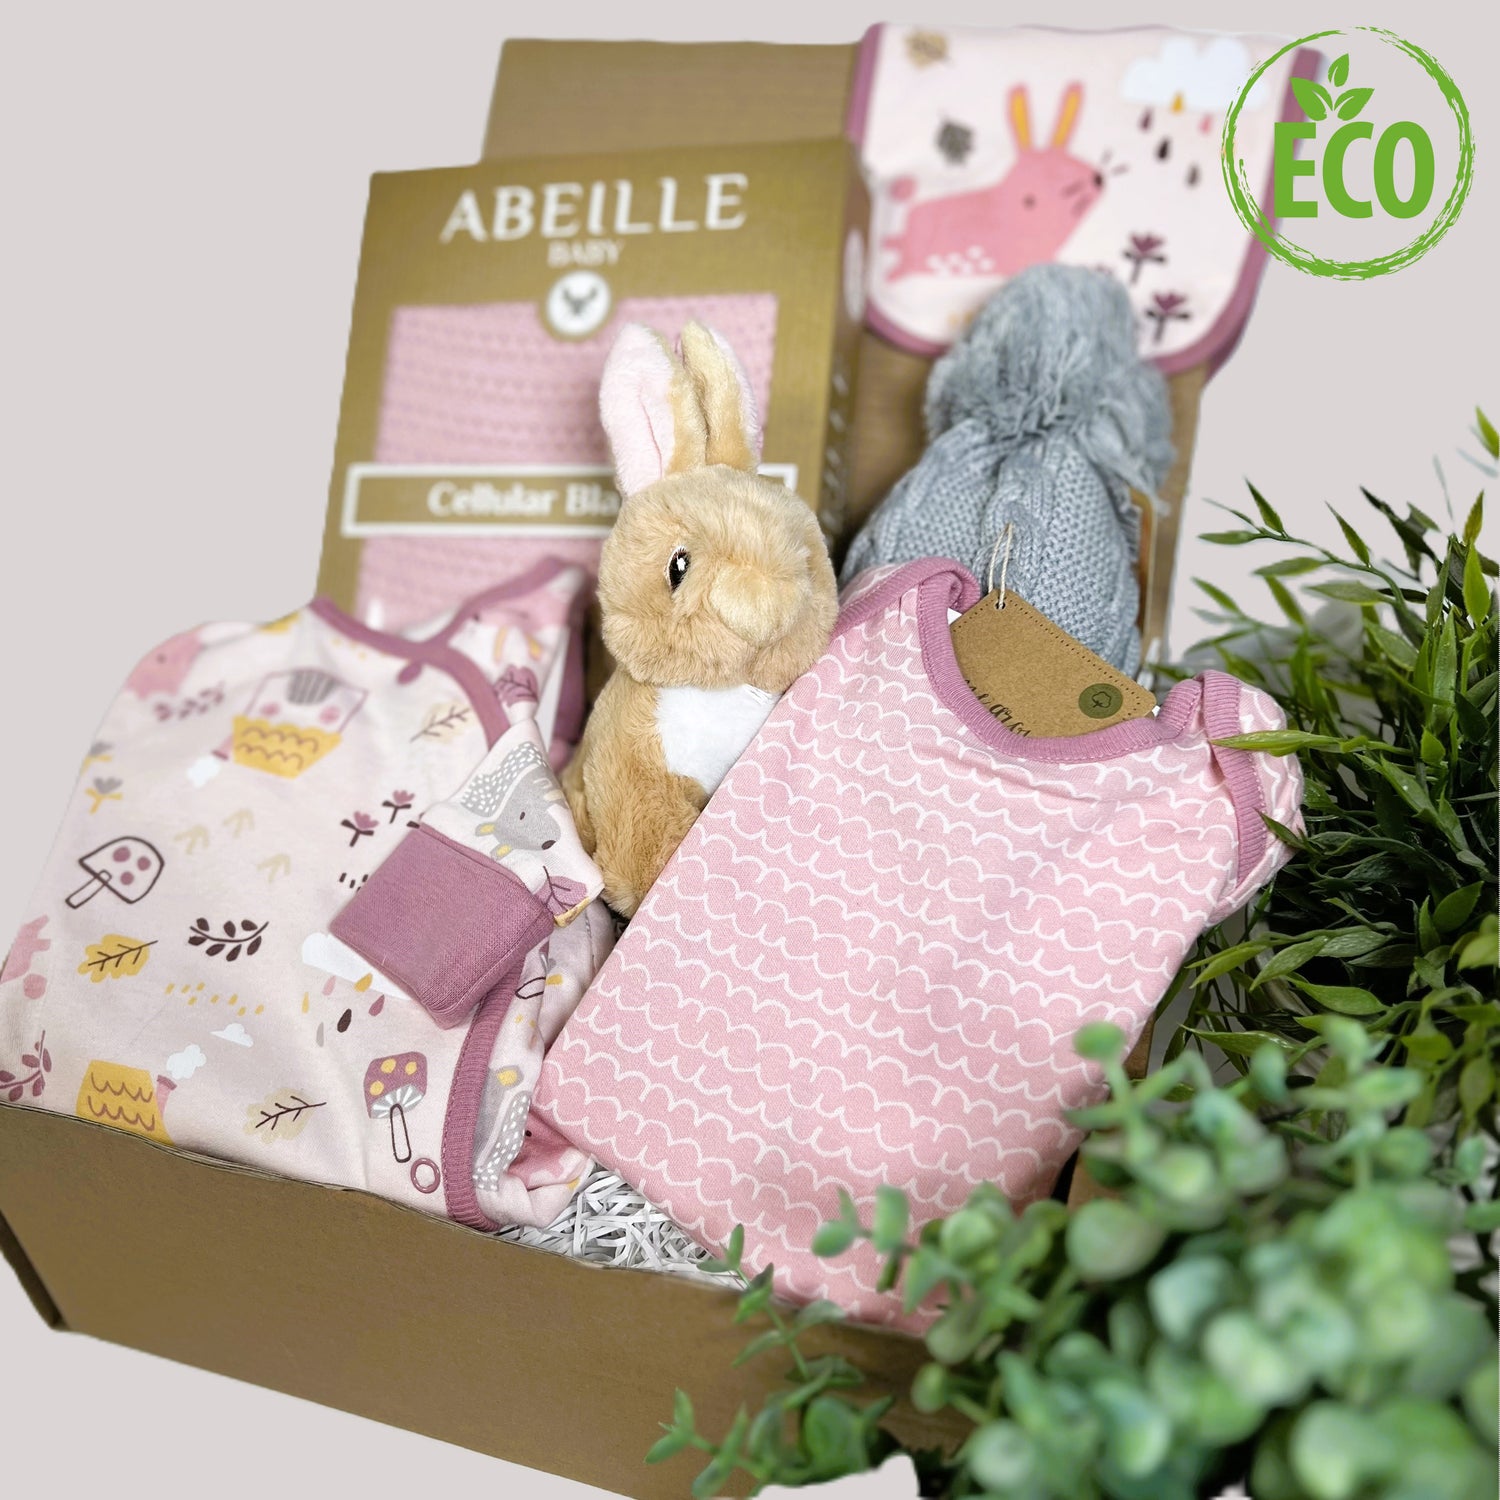 Pink new baby girl gift, eco friendly contents including organic cotton 3 piece baby clothing set with fold over cuffs and feet, a pink cotton cellular baby blanket, a grey baby pompom hat and a cute Eco-Nation bunny soft baby toy